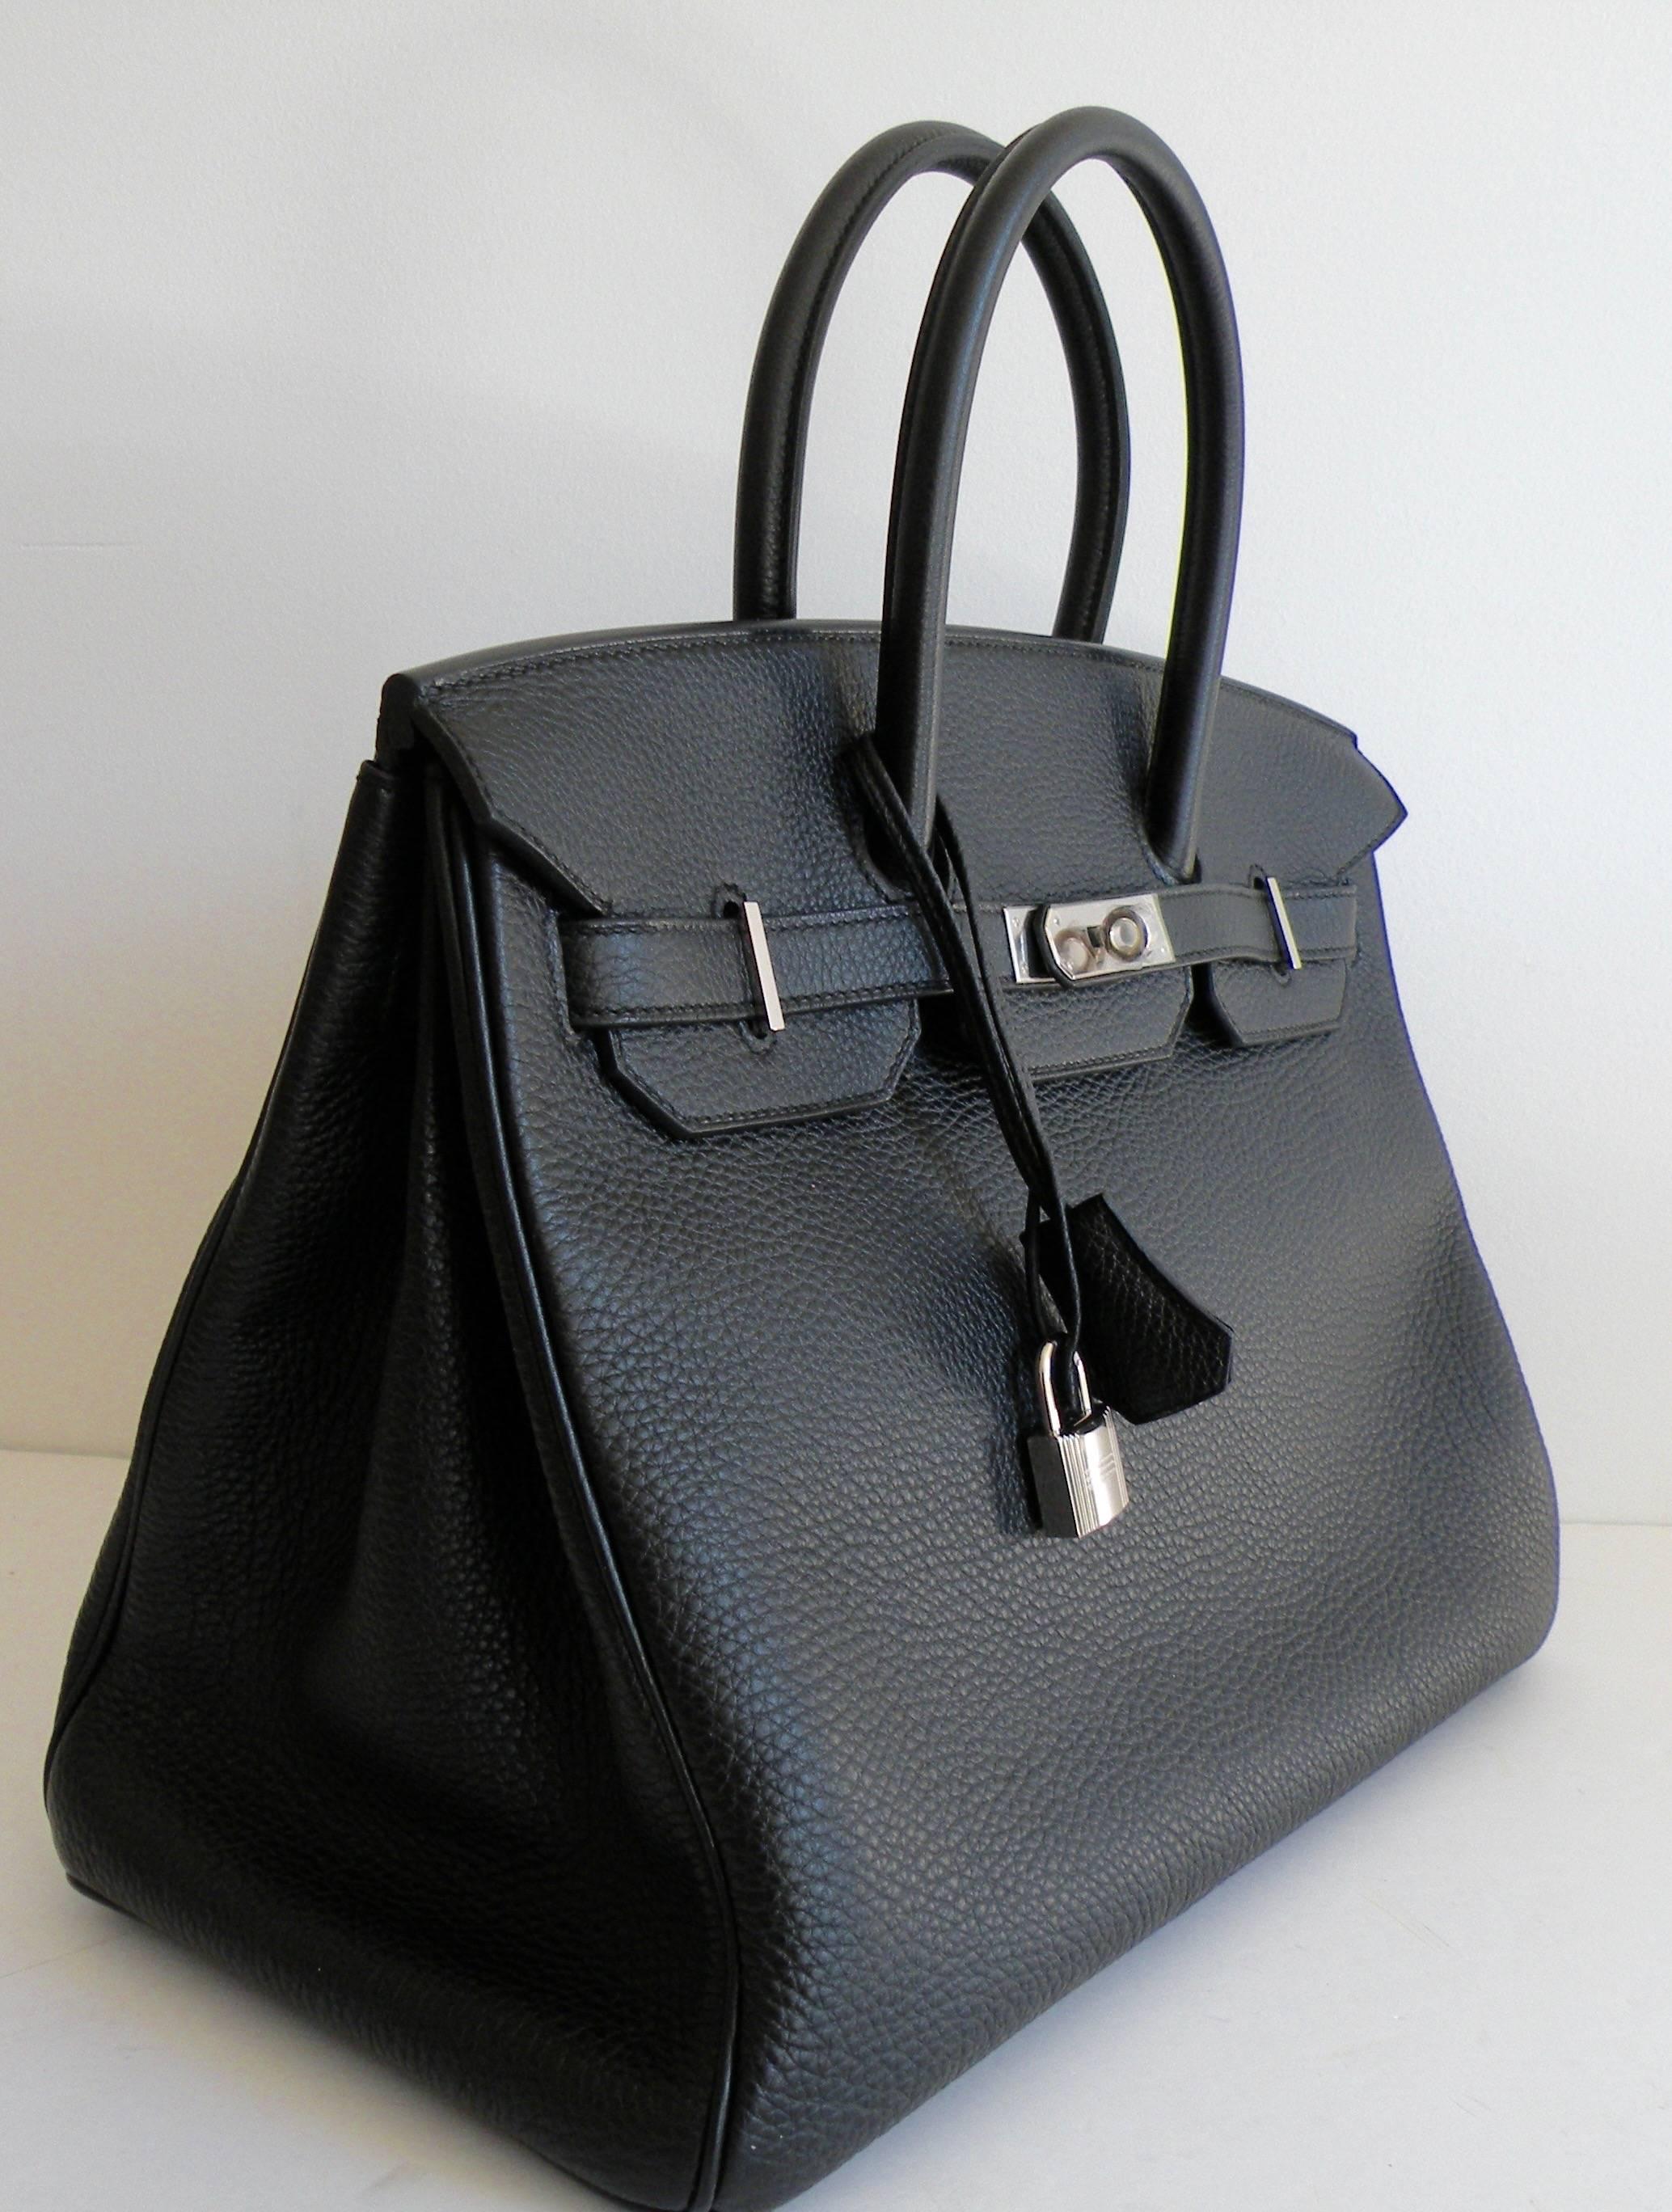 Hermes Black Birkin 35 Palladium Hardware In New Condition For Sale In West Chester, PA